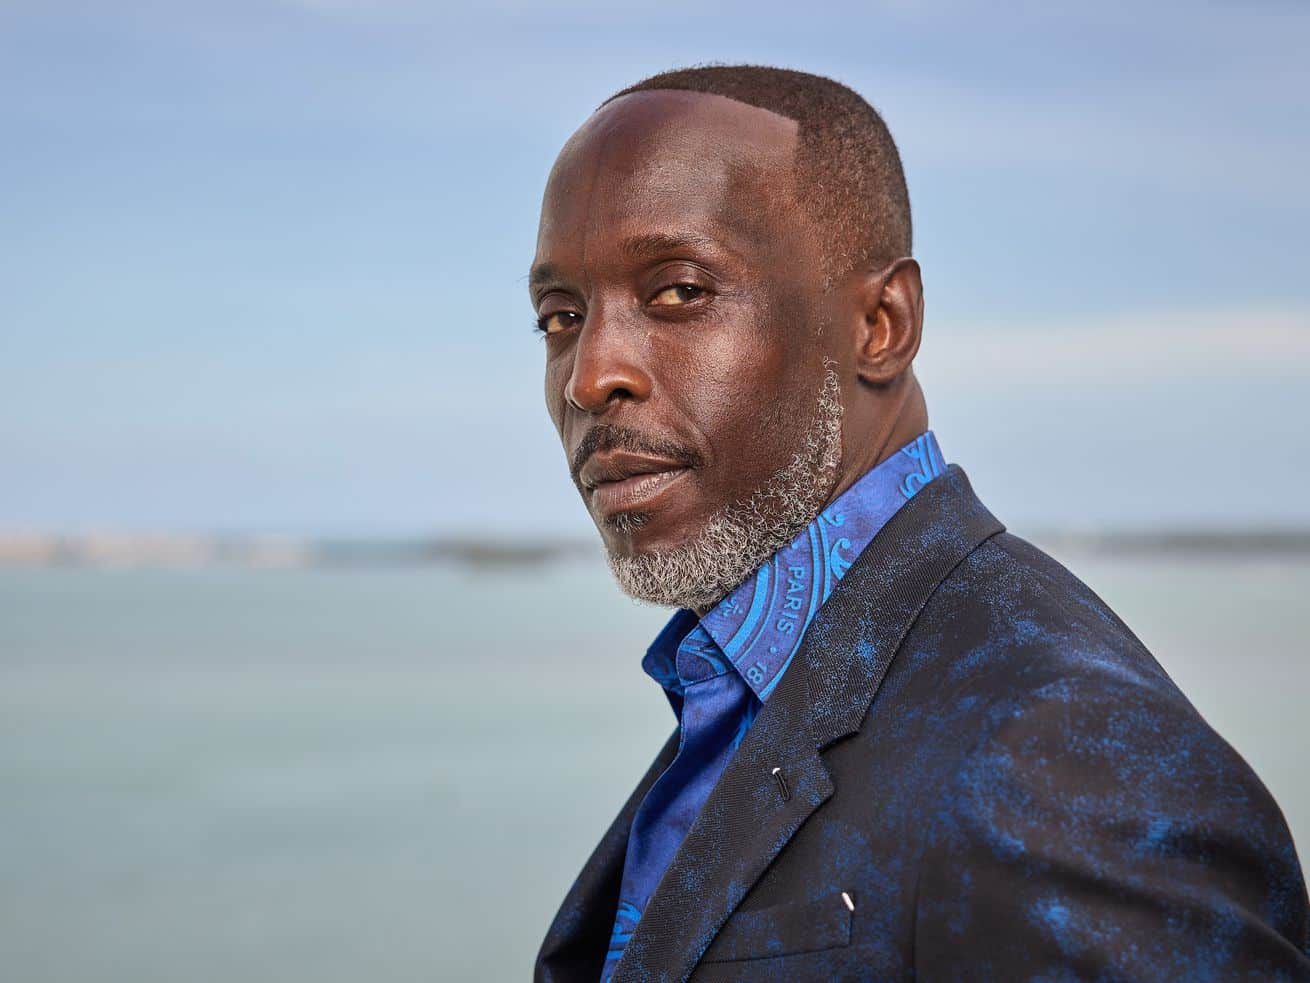 Michael K. Williams was more than just Omar from The Wire. He elevated Black identity onscreen.